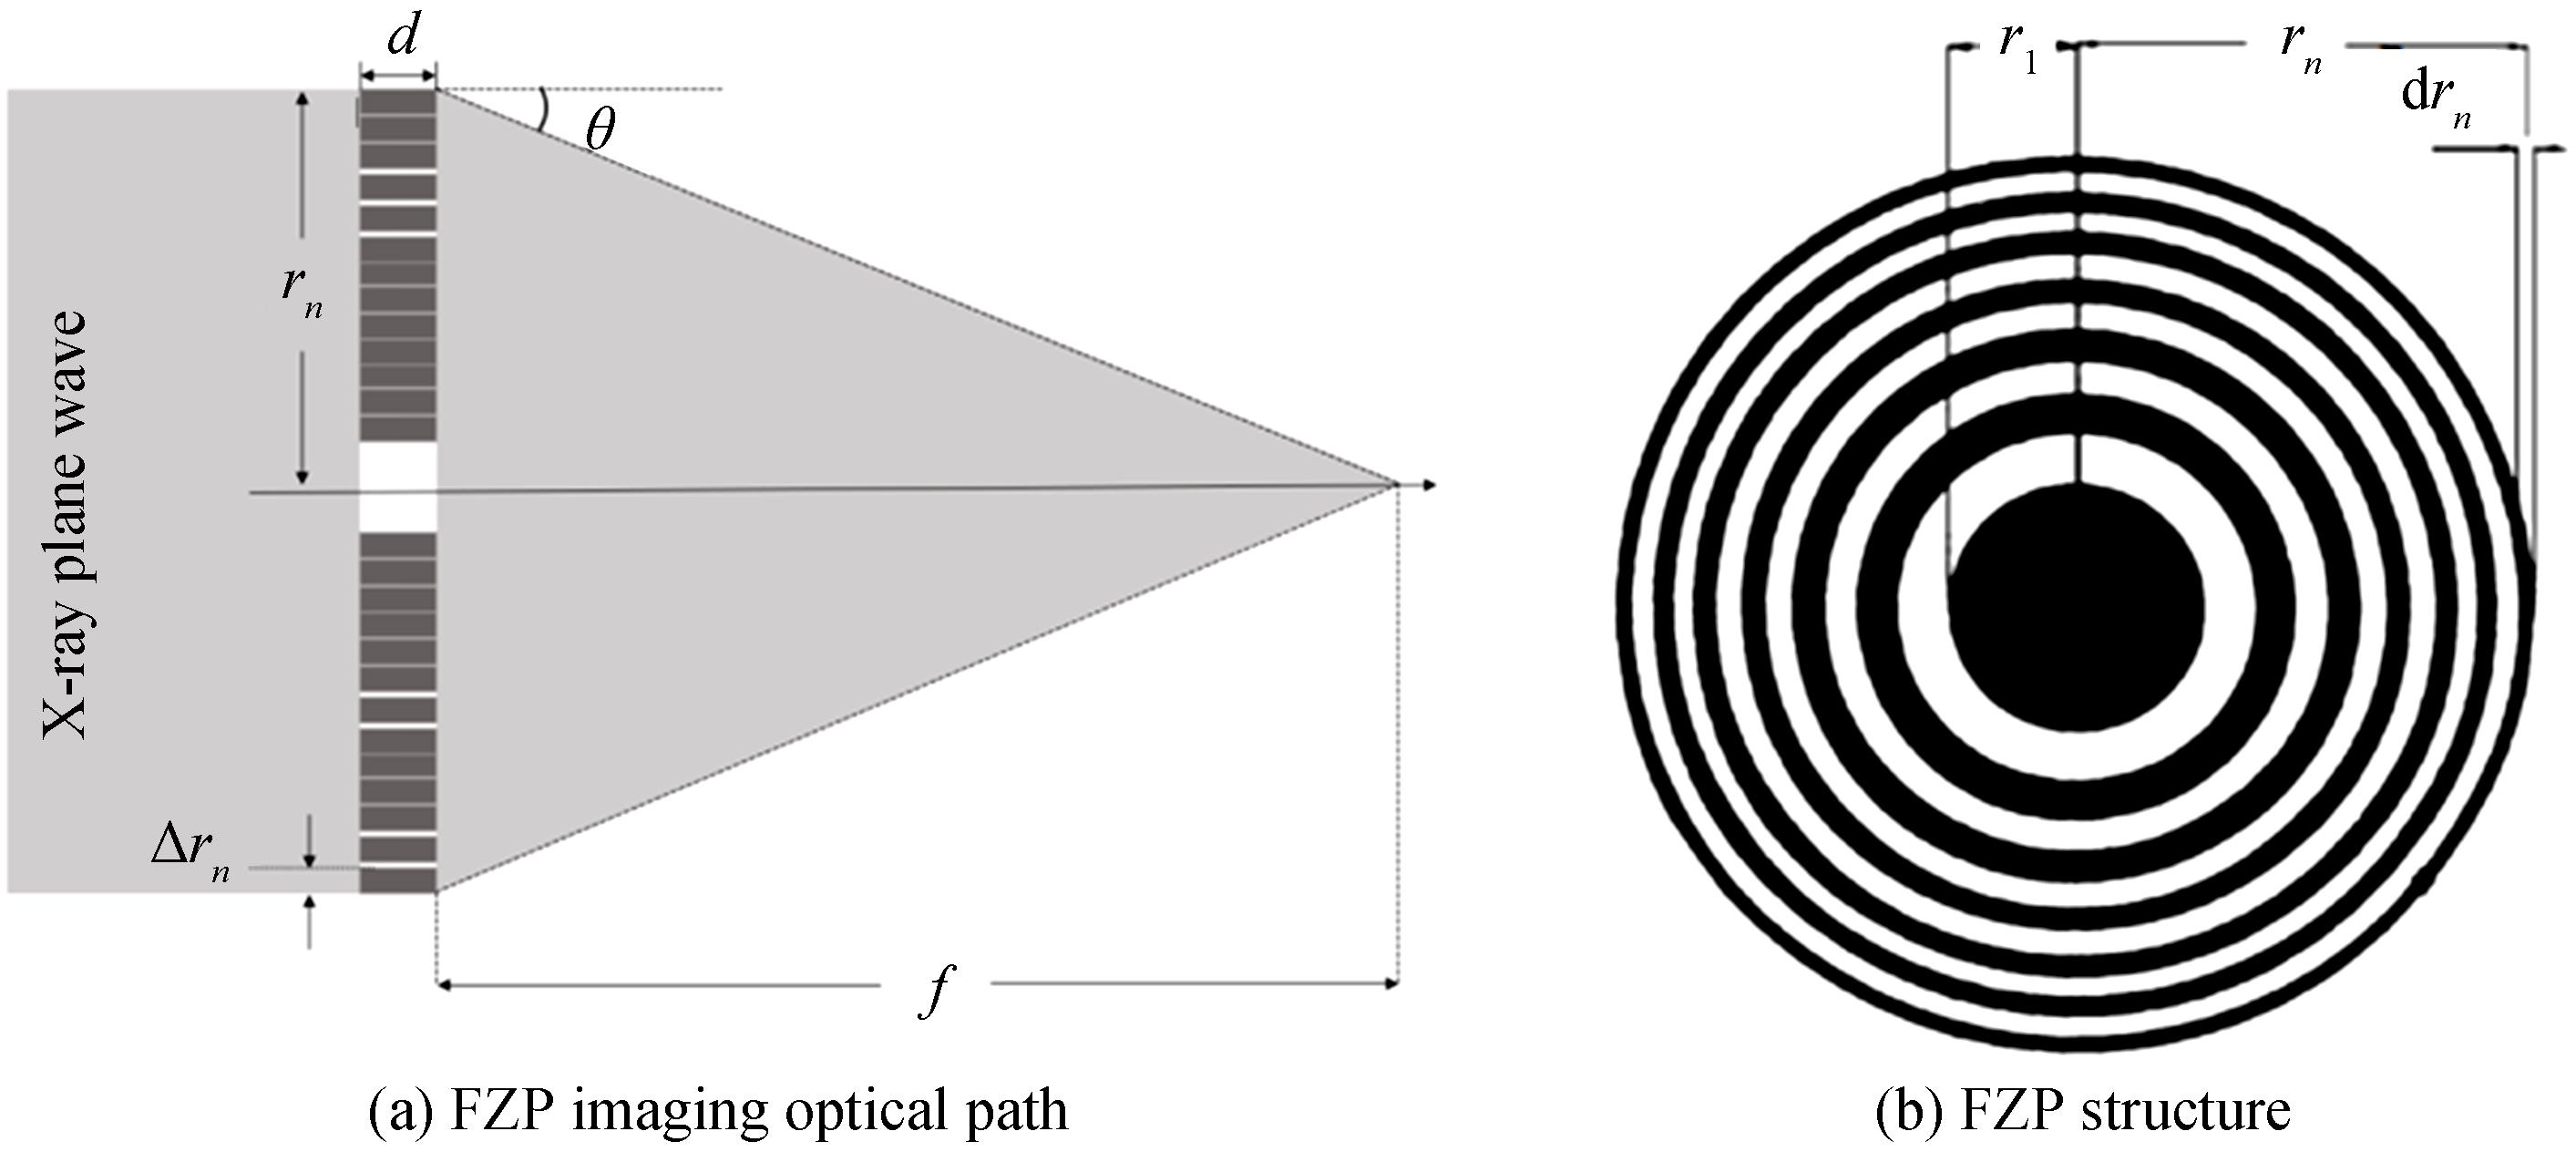 Schematic diagrams of the FZP structure and imaging optical path